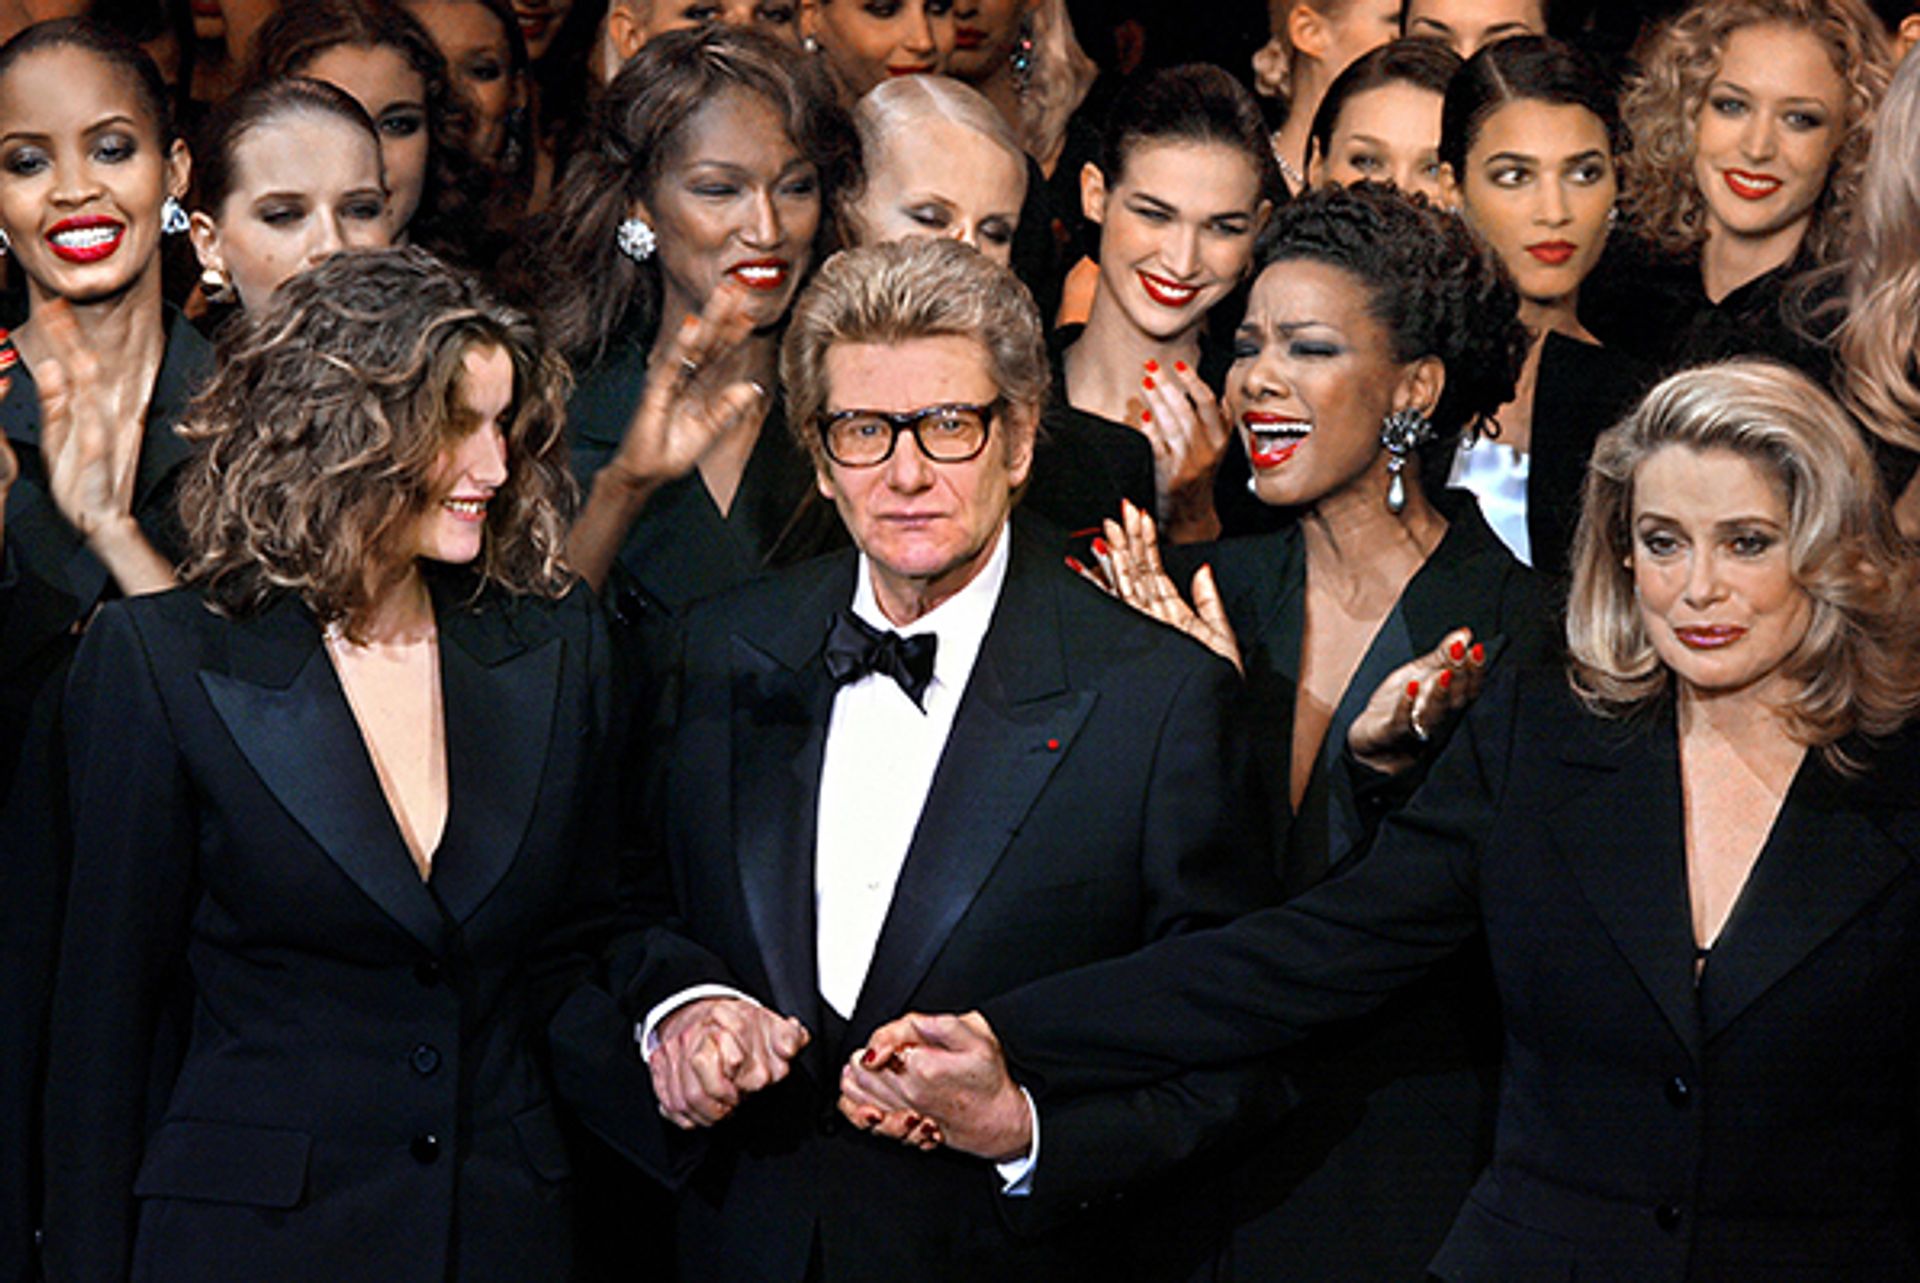 Designer Yves Saint-Laurent with the French model Laetitia Casta (left) and the French actress Catherine Deneuve (R) at his last ever haute-couture show in 2002 © Jean-Pierre Muller/EPA